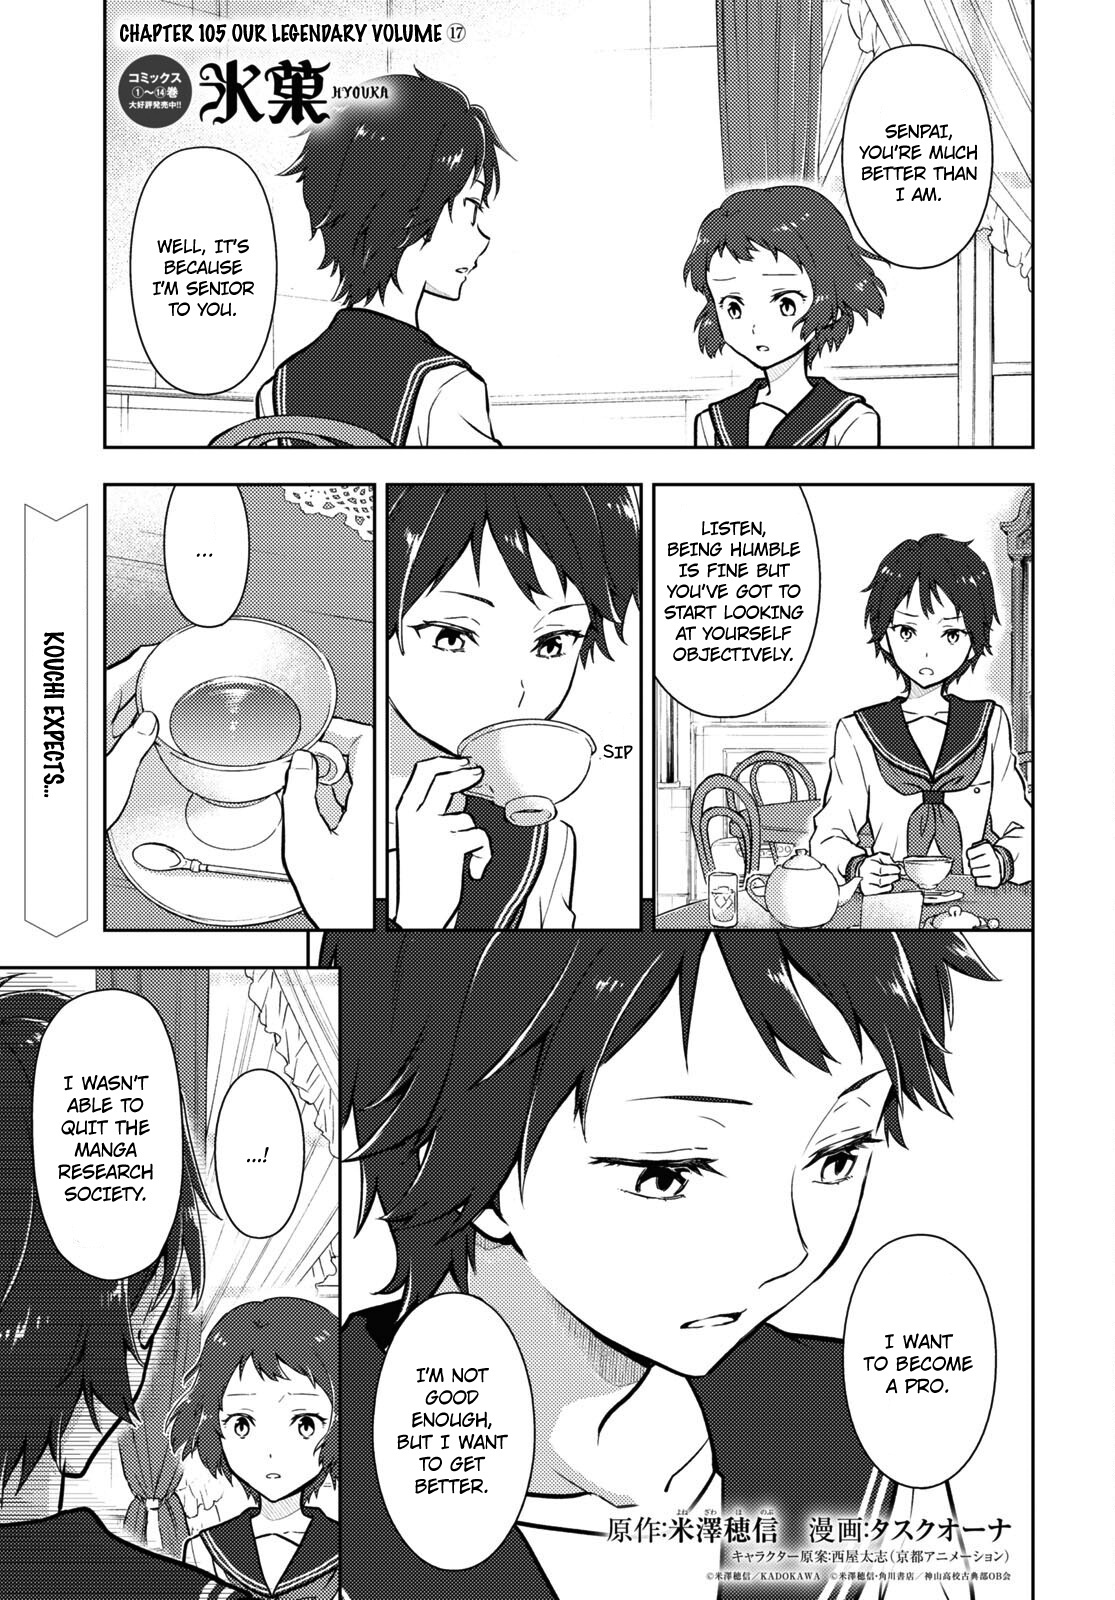 Hyouka Chapter 105: Our Legendary Volume ⑰ - Picture 1